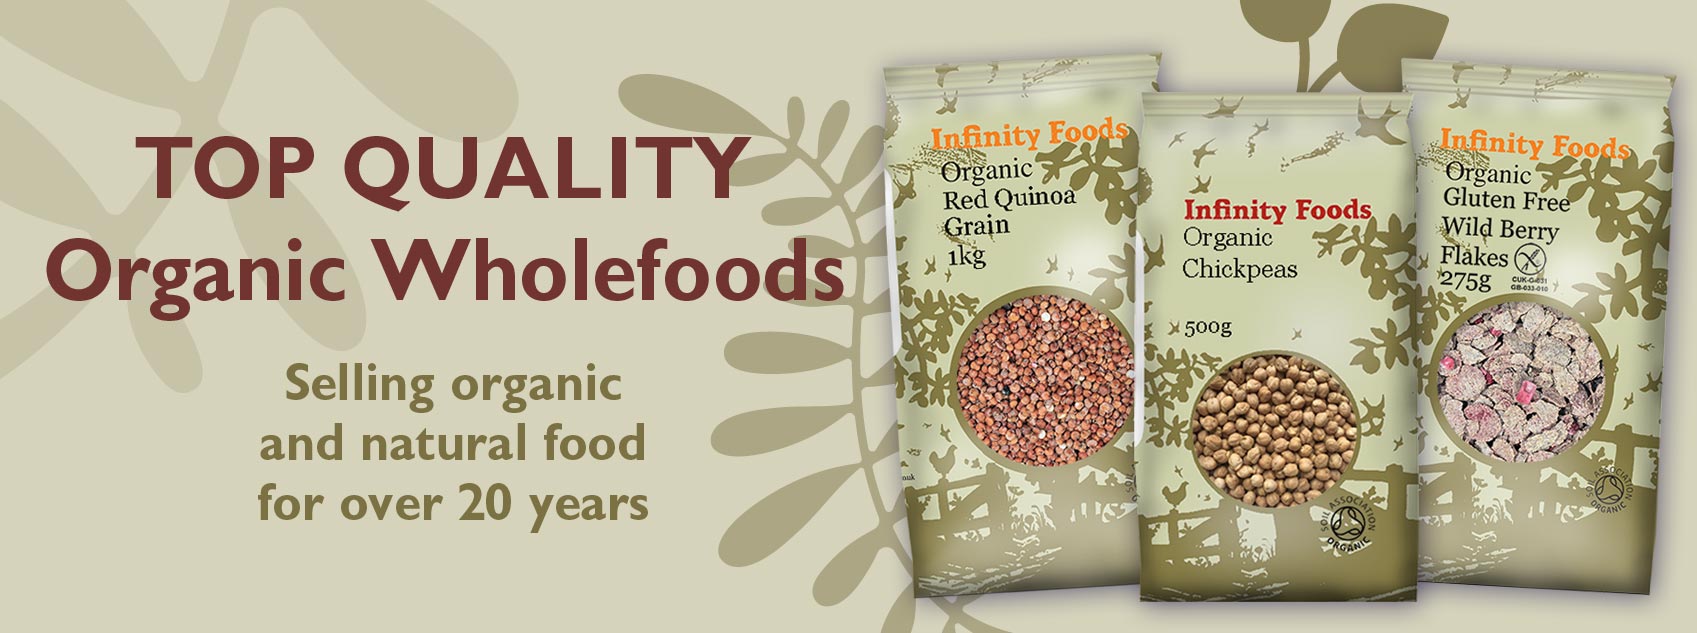 Top quality organic wholefoods - Selling organic and natural food for over 20 years